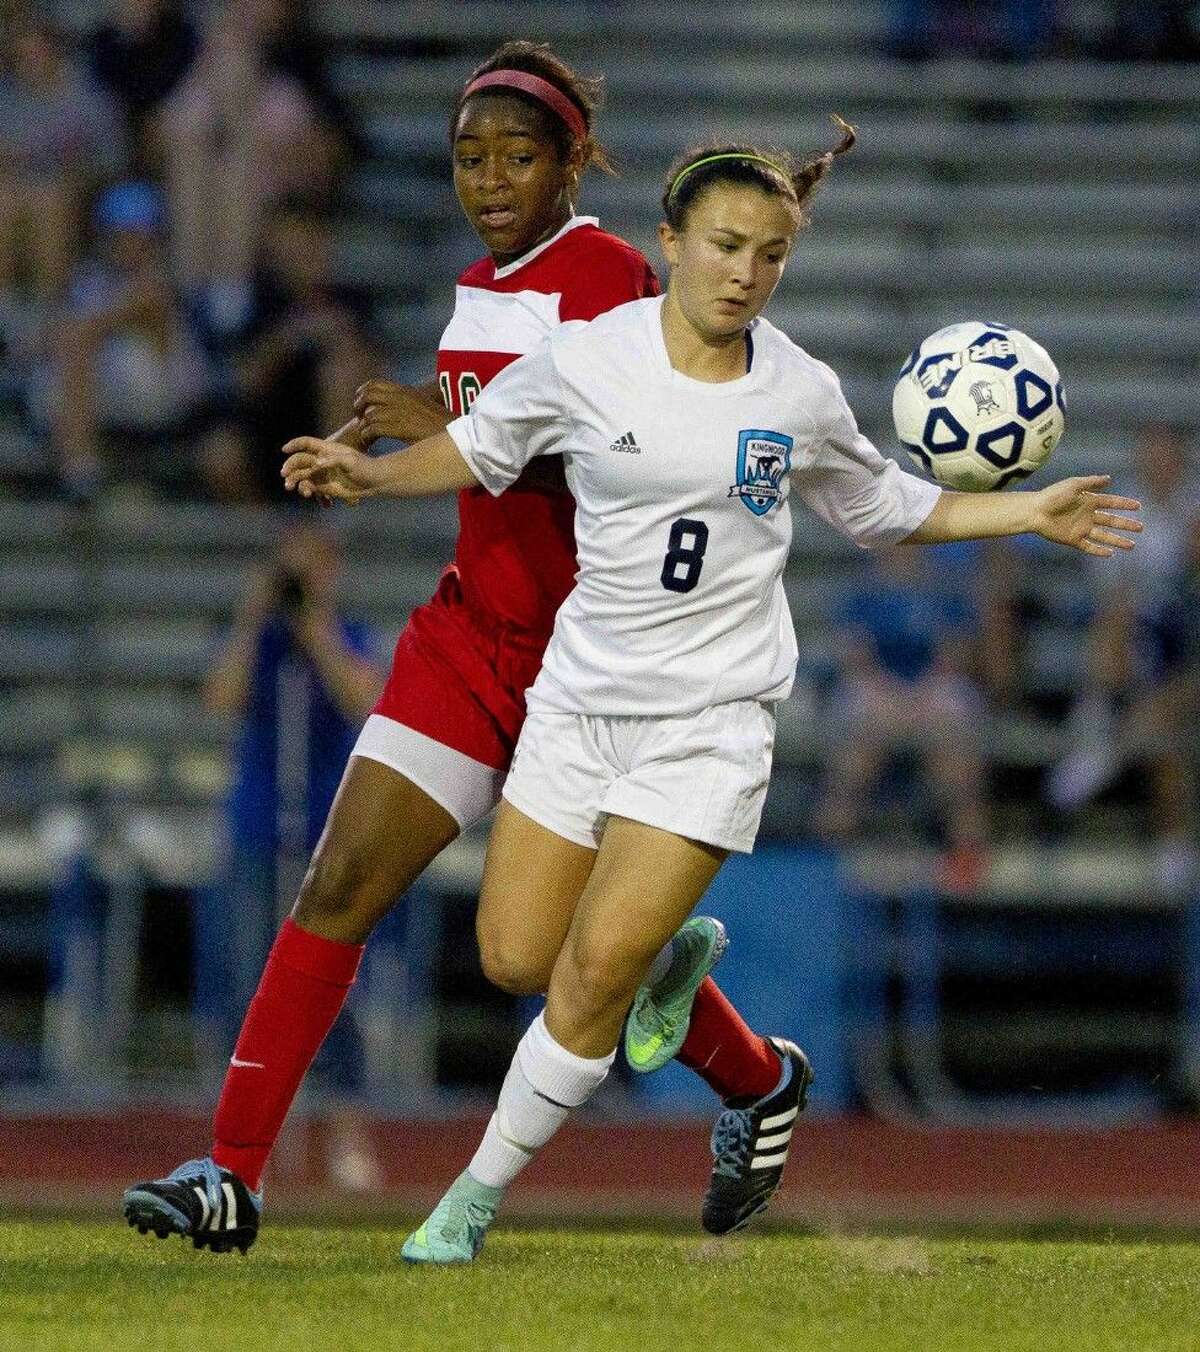 Kingwood's Catherine Childs looks to control the ball as The Woodlands forward Jazzy Richards chases her down during the first period of a District 16-6A girls soccer game at Kingwood High School Friday. The Woodlands defeated Kingwood 3-0. Go to HCNpics.com to purchase this photo and others like it.